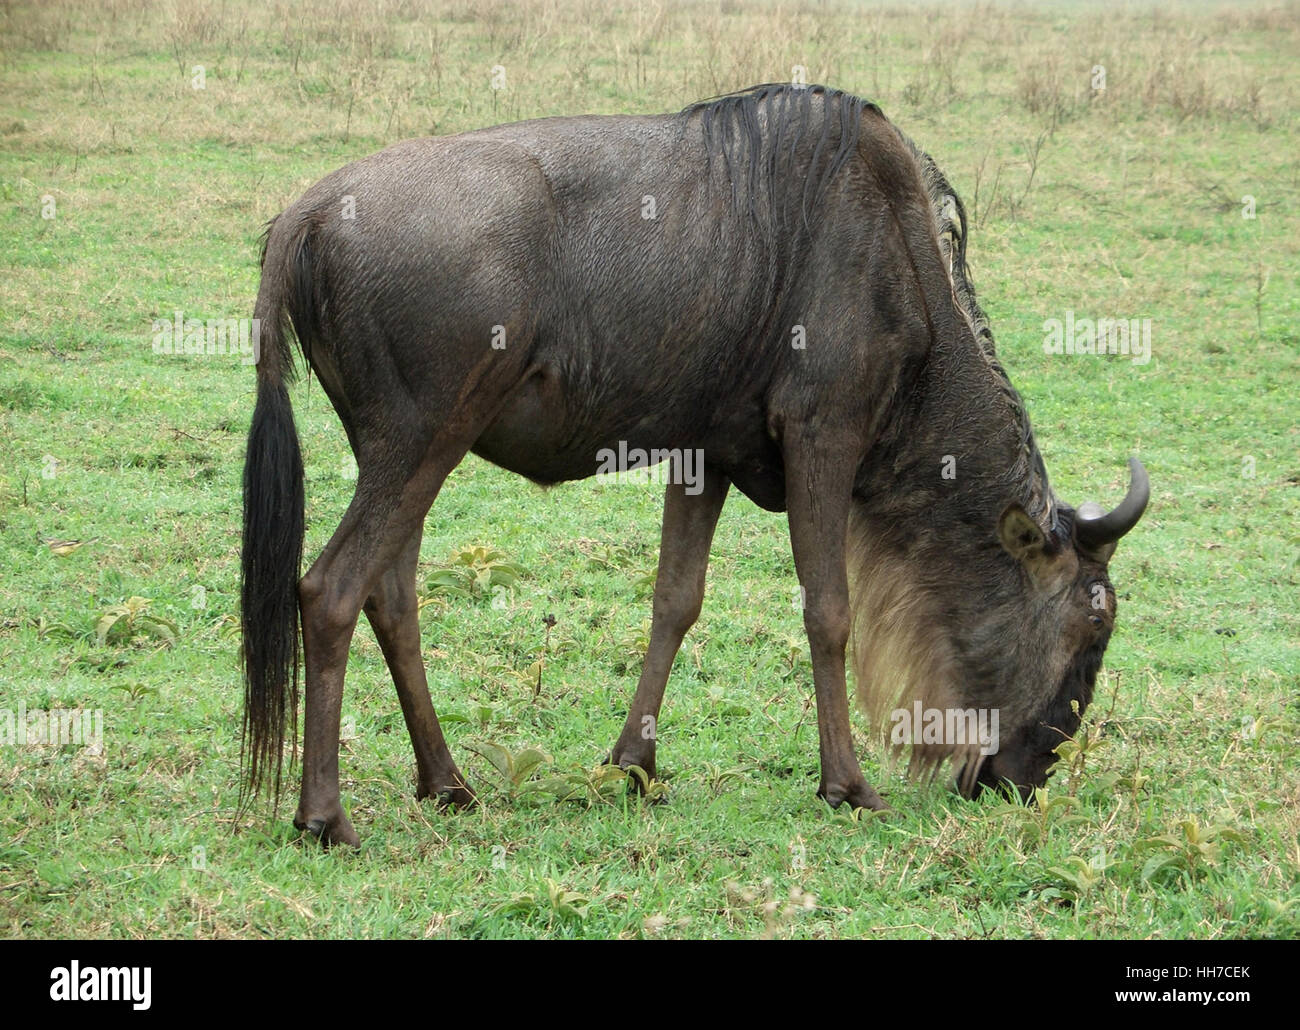 Blue Wildebeest at feed in Tanzania (Africa) Stock Photo